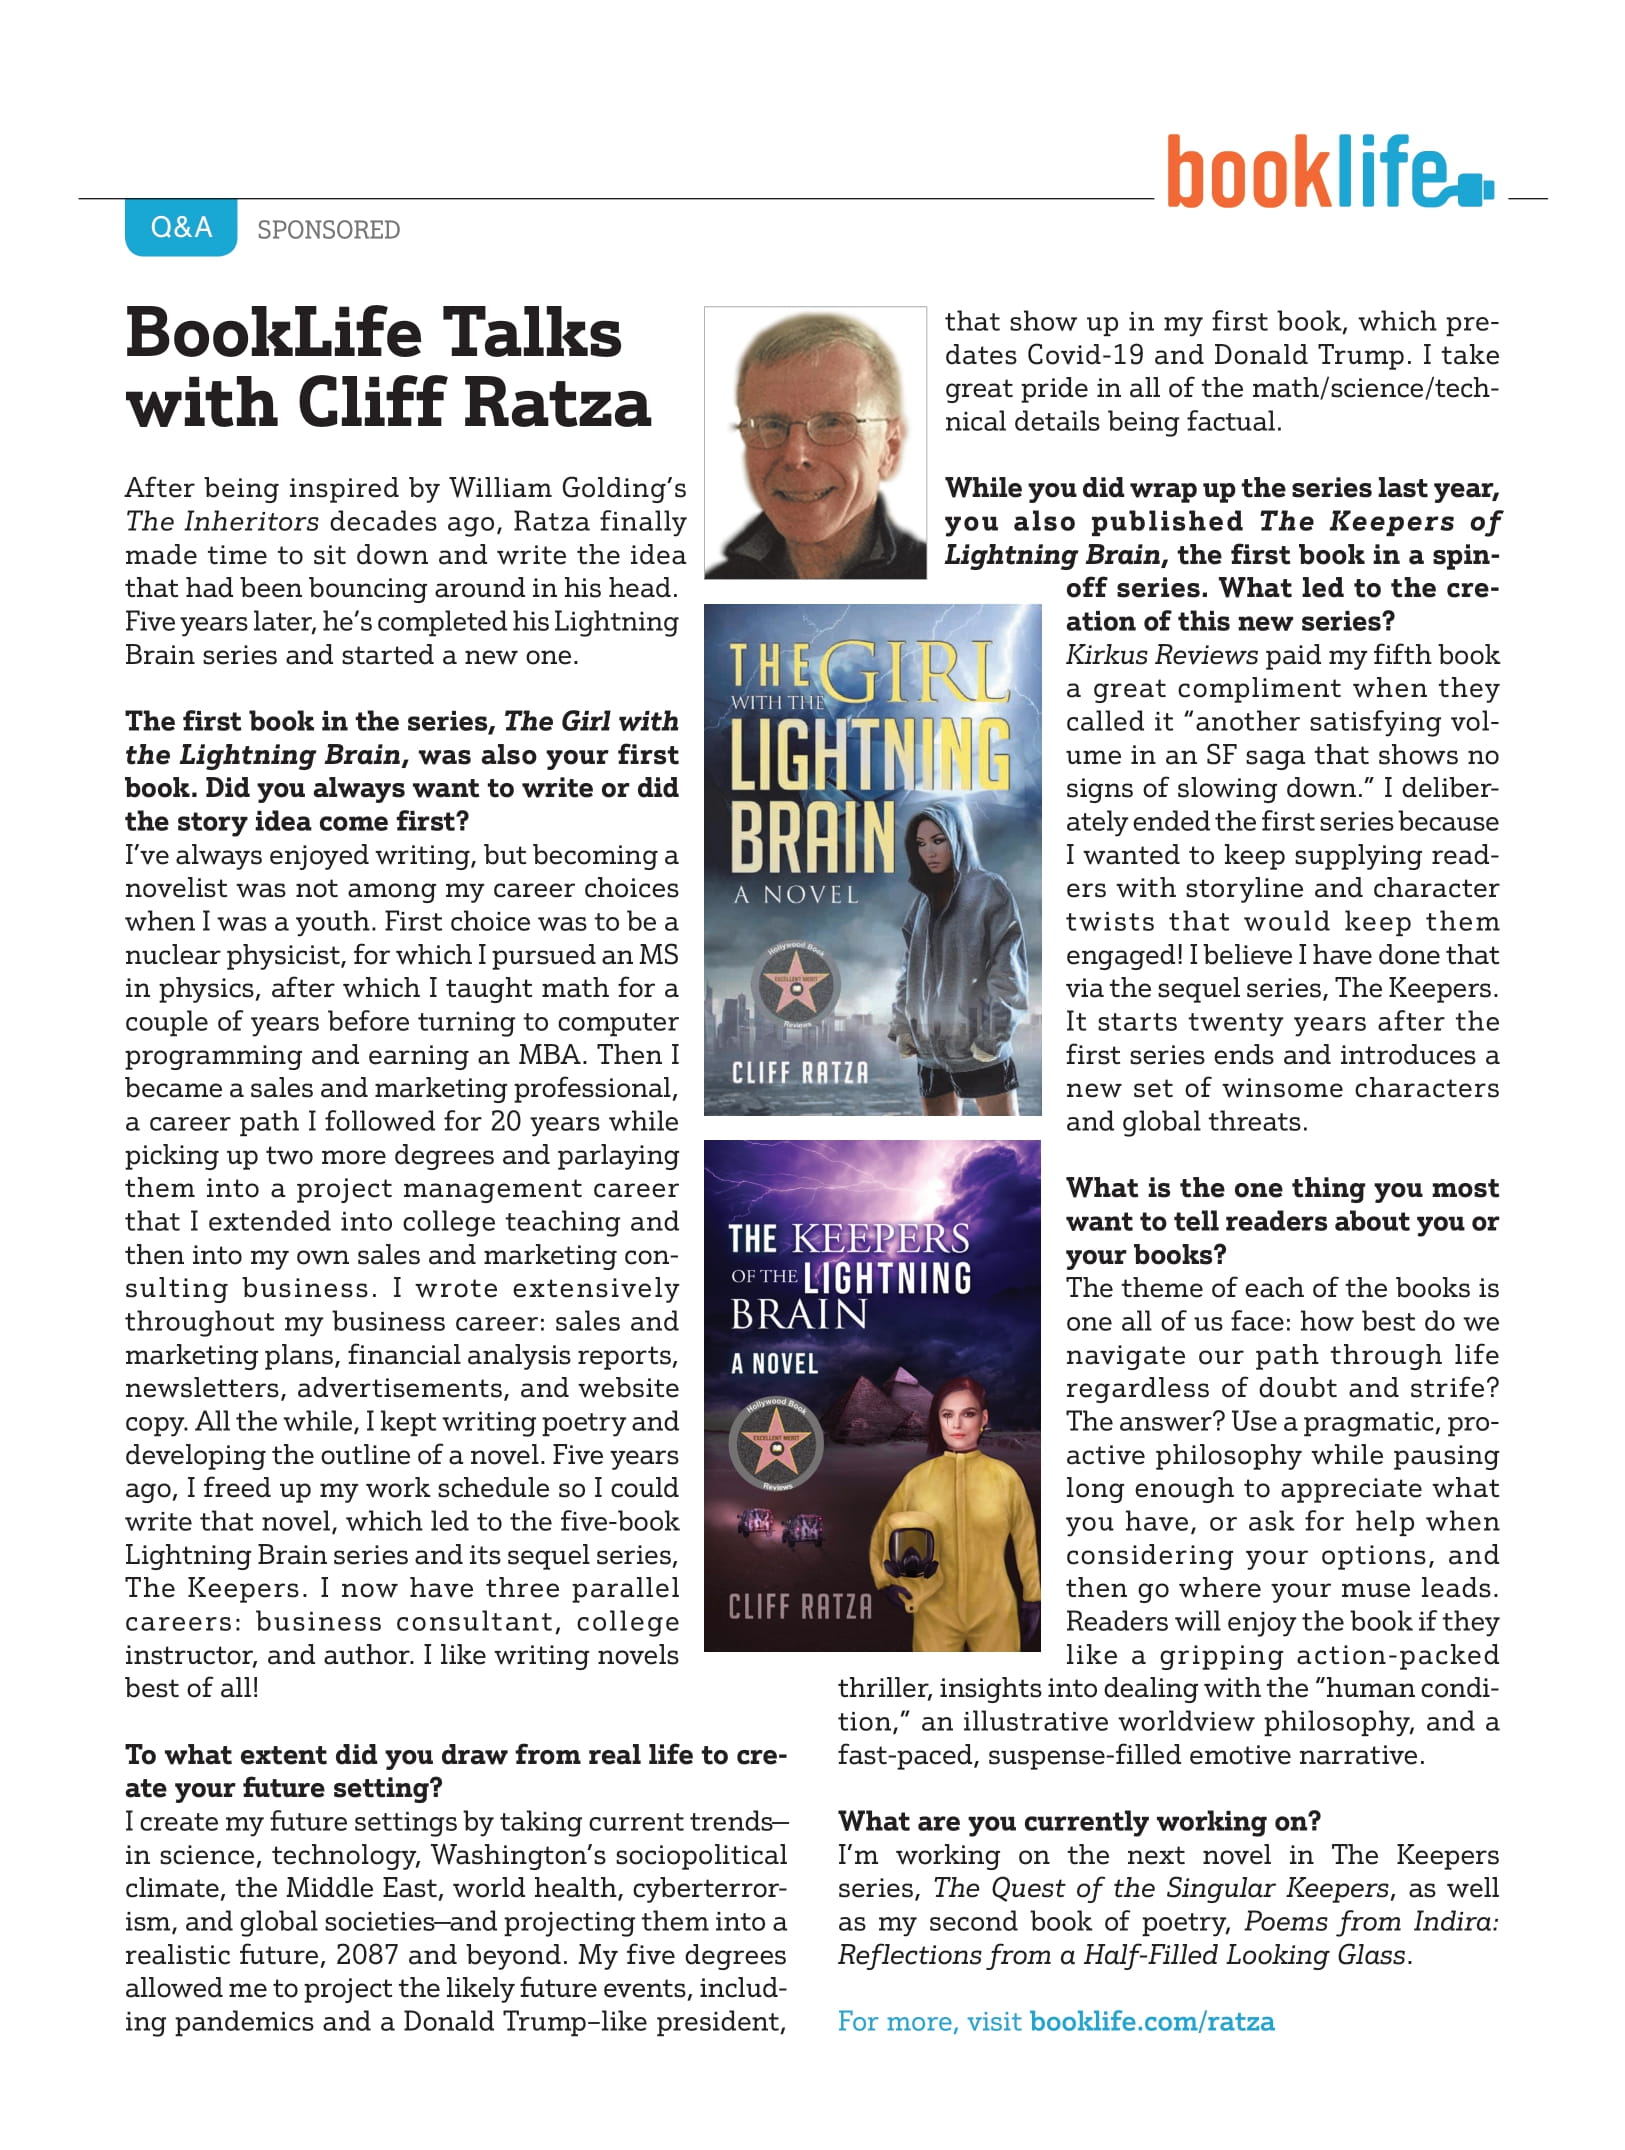 Article about the Lightning Brain Series on Booklife magazine